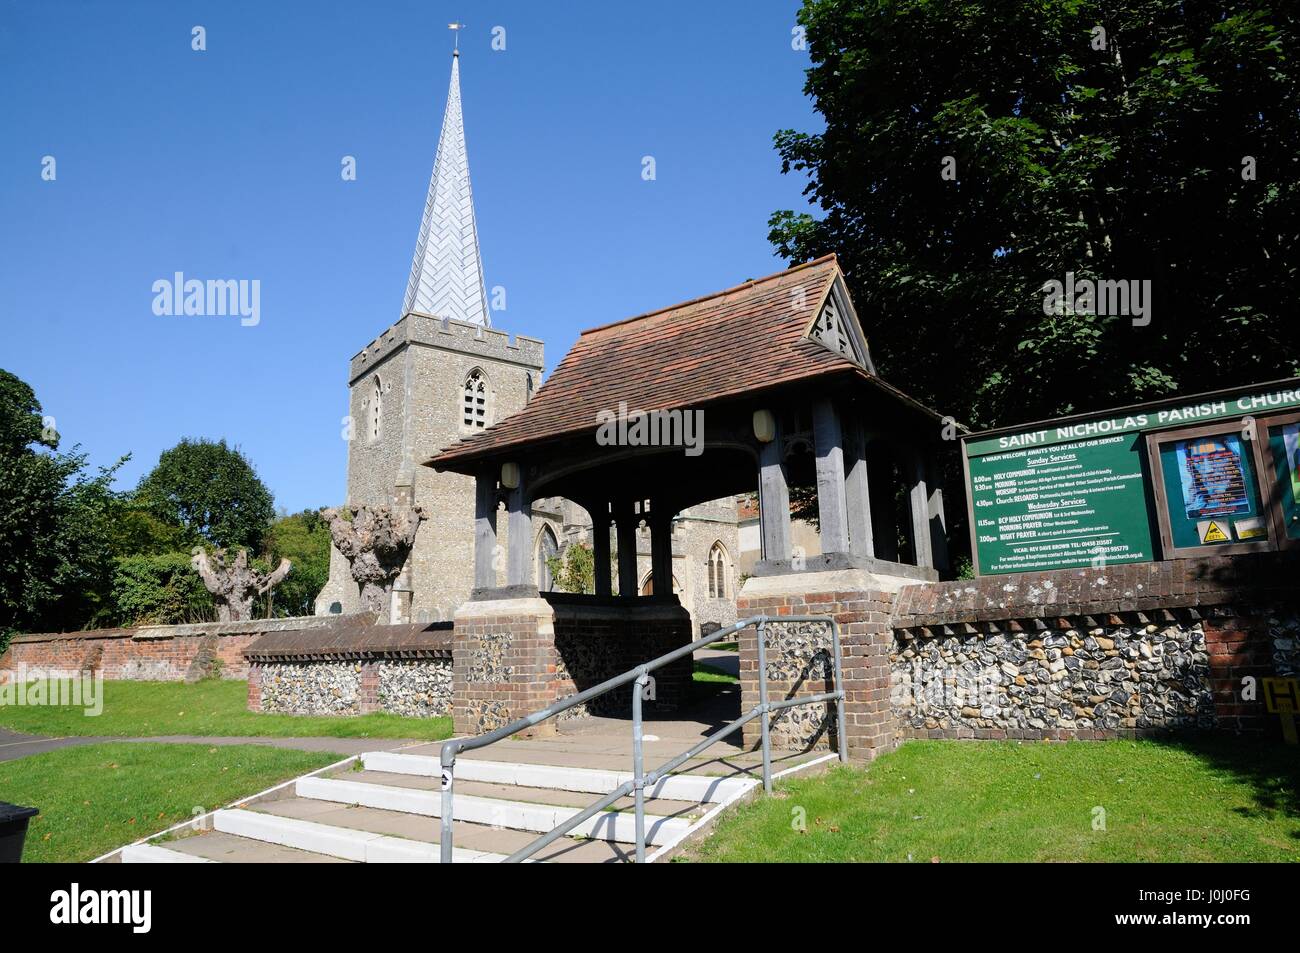 St Nicholas Church, Stevenage, Hertfordshire, dates to the twelfth century with alterations in the fourteenth century. It has a low tower with a spire Stock Photo